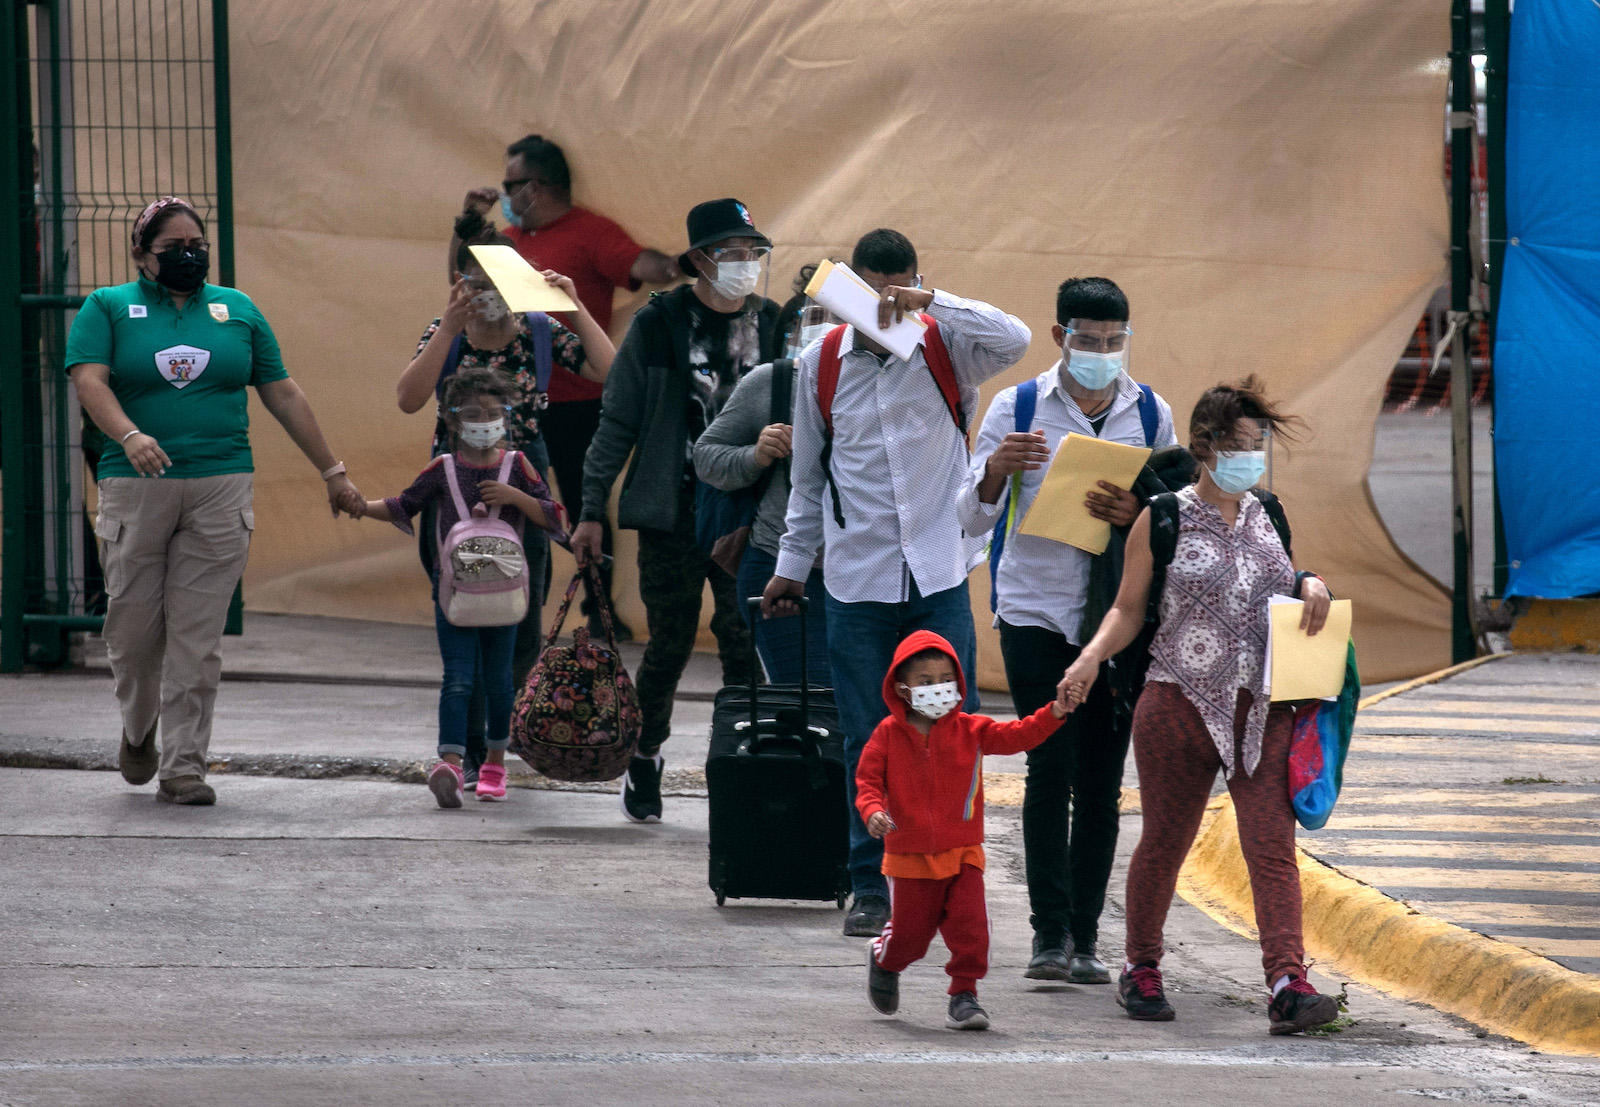 Mask-wearing asylum seekers carrying bags walk into the US